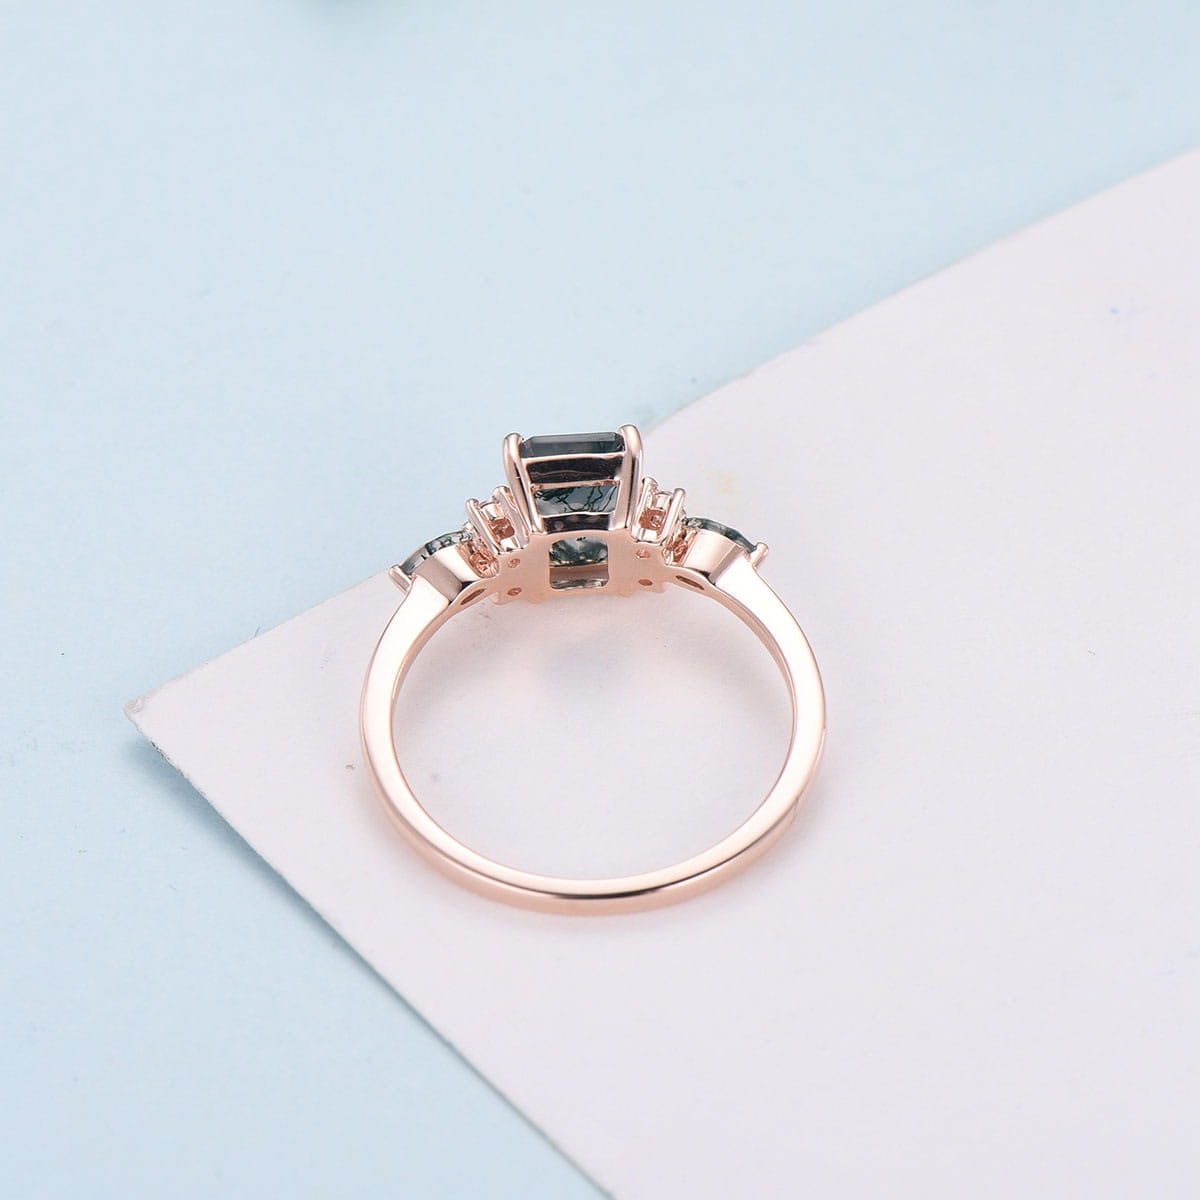 Vintage Emerald Cut Moss Agate Ring Rose Gold Art Deco 7 Stone Cluster Aquatic Agate Engagement Ring Marquise Moss Moissanite Wedding Ring - PENFINE